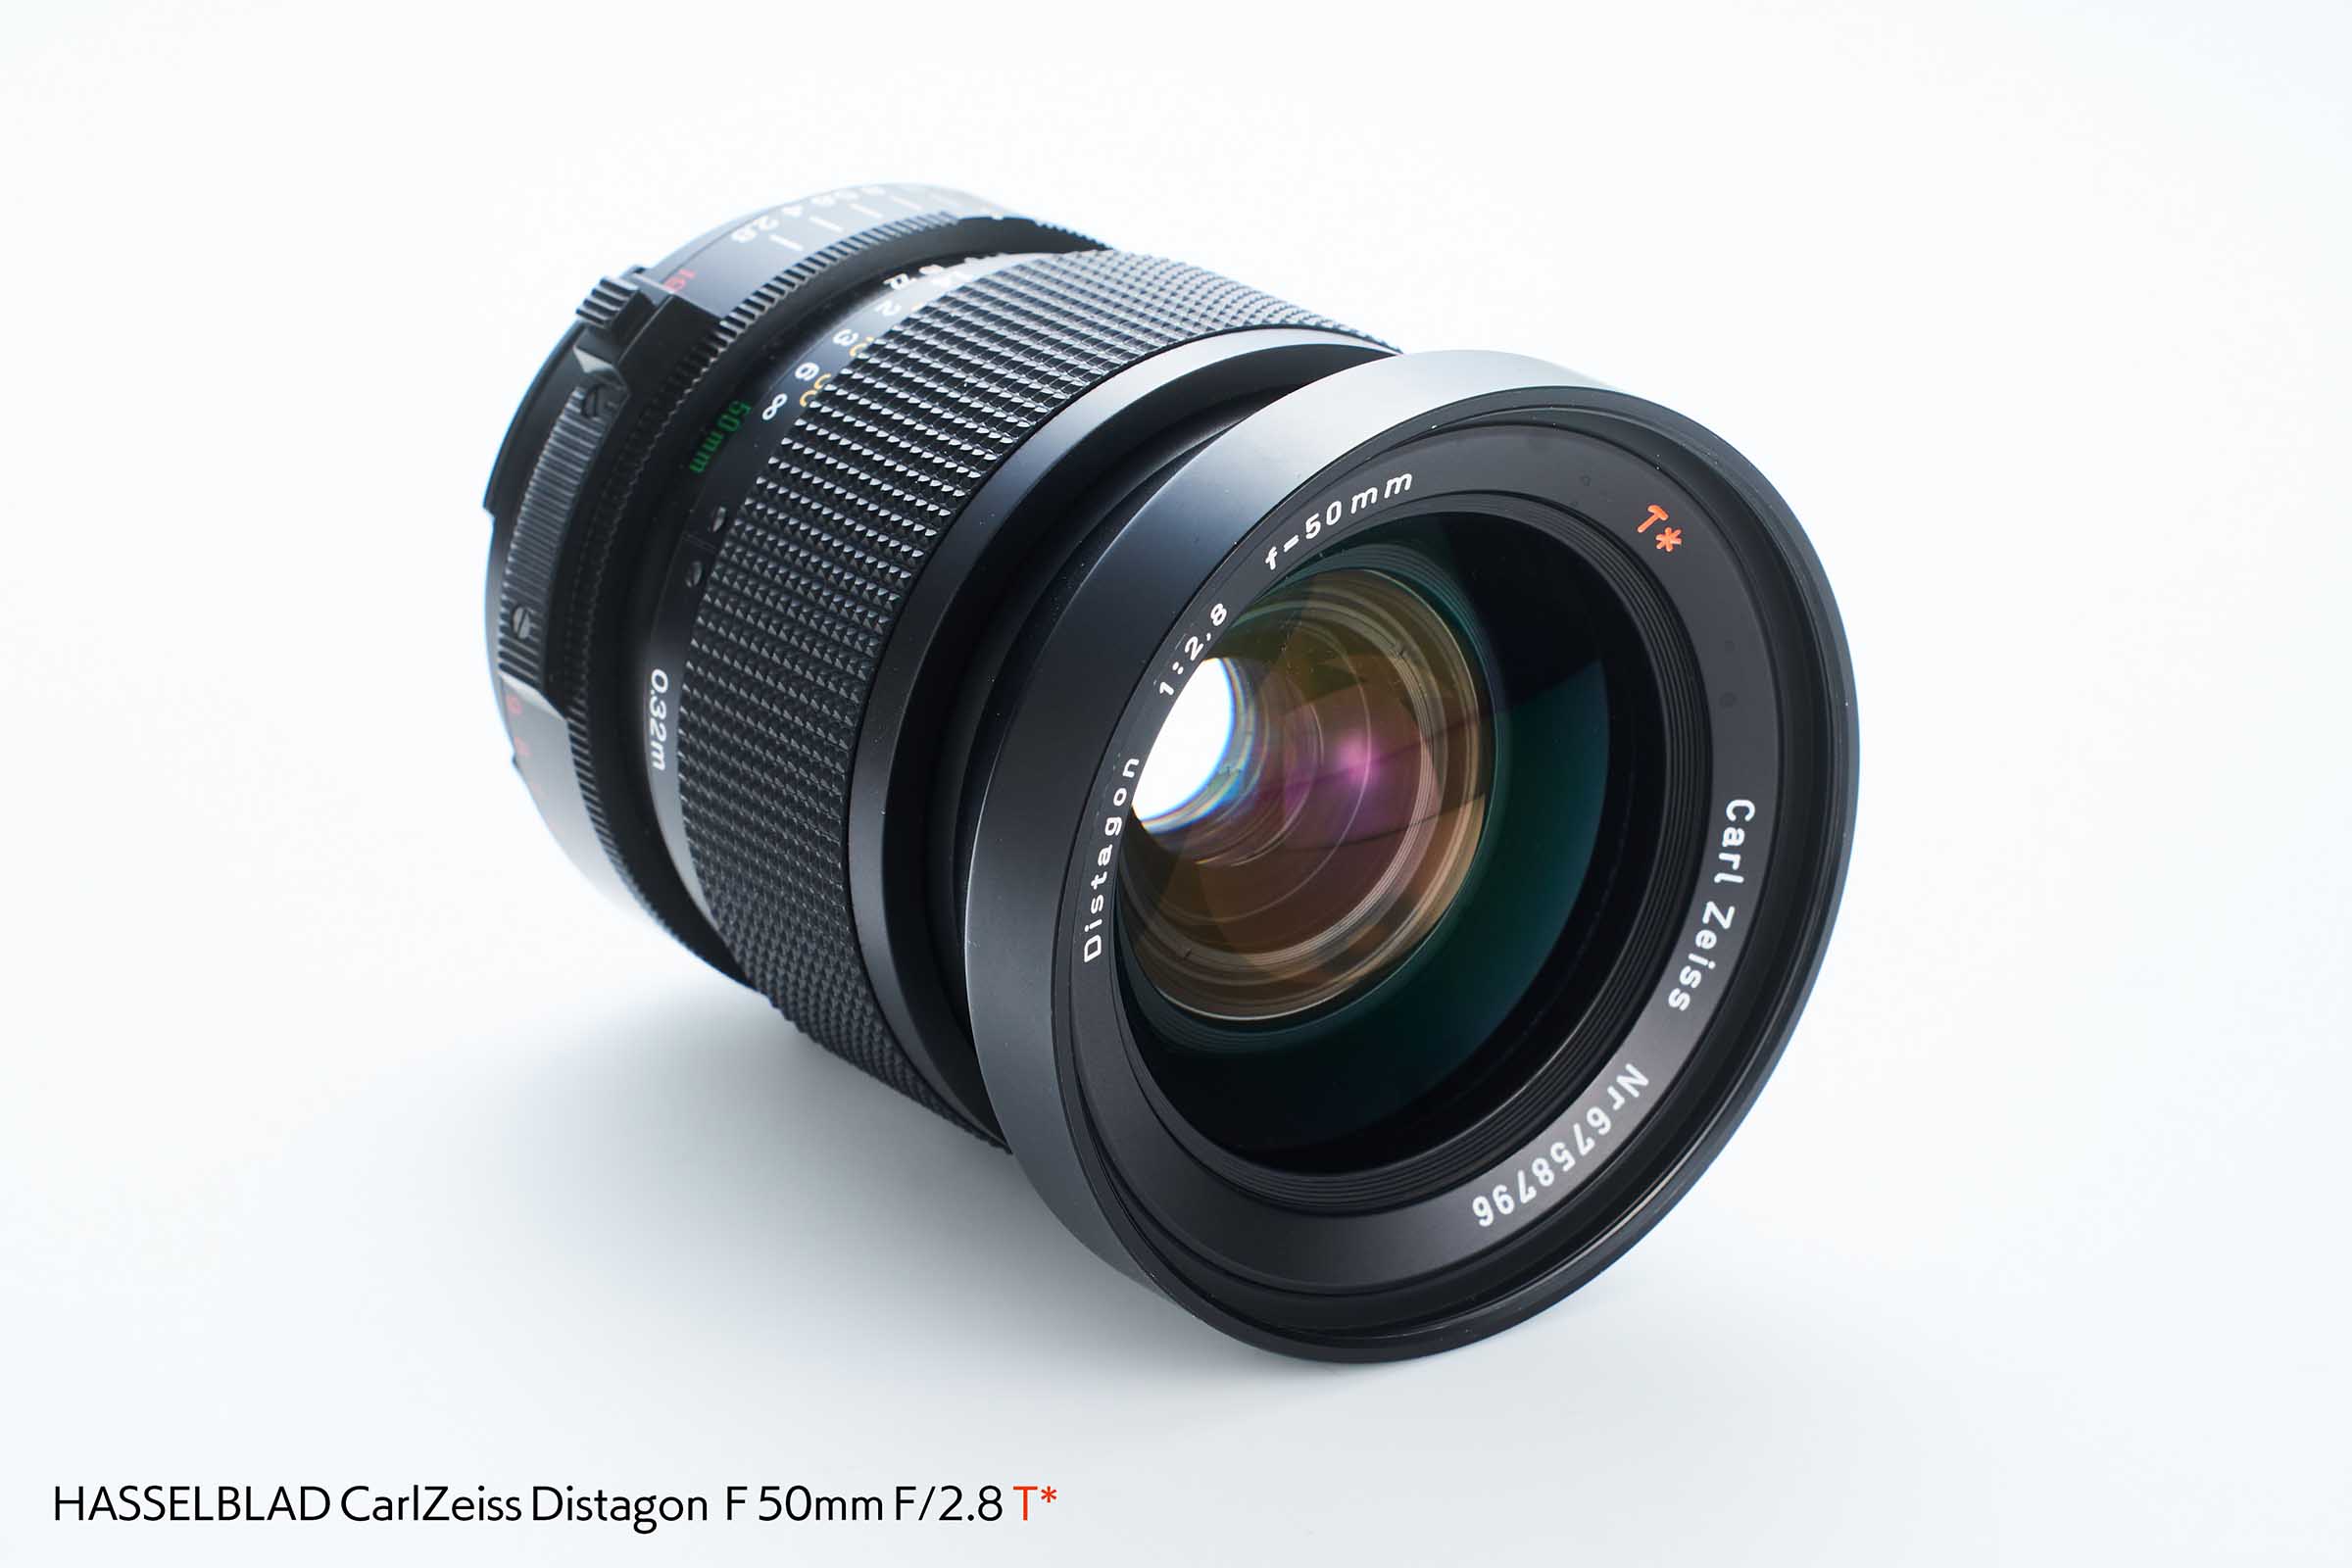 HASSELBLAD Carlzeiss Distagon F 50mm f/2.8 T* の無駄話。 | 使える 